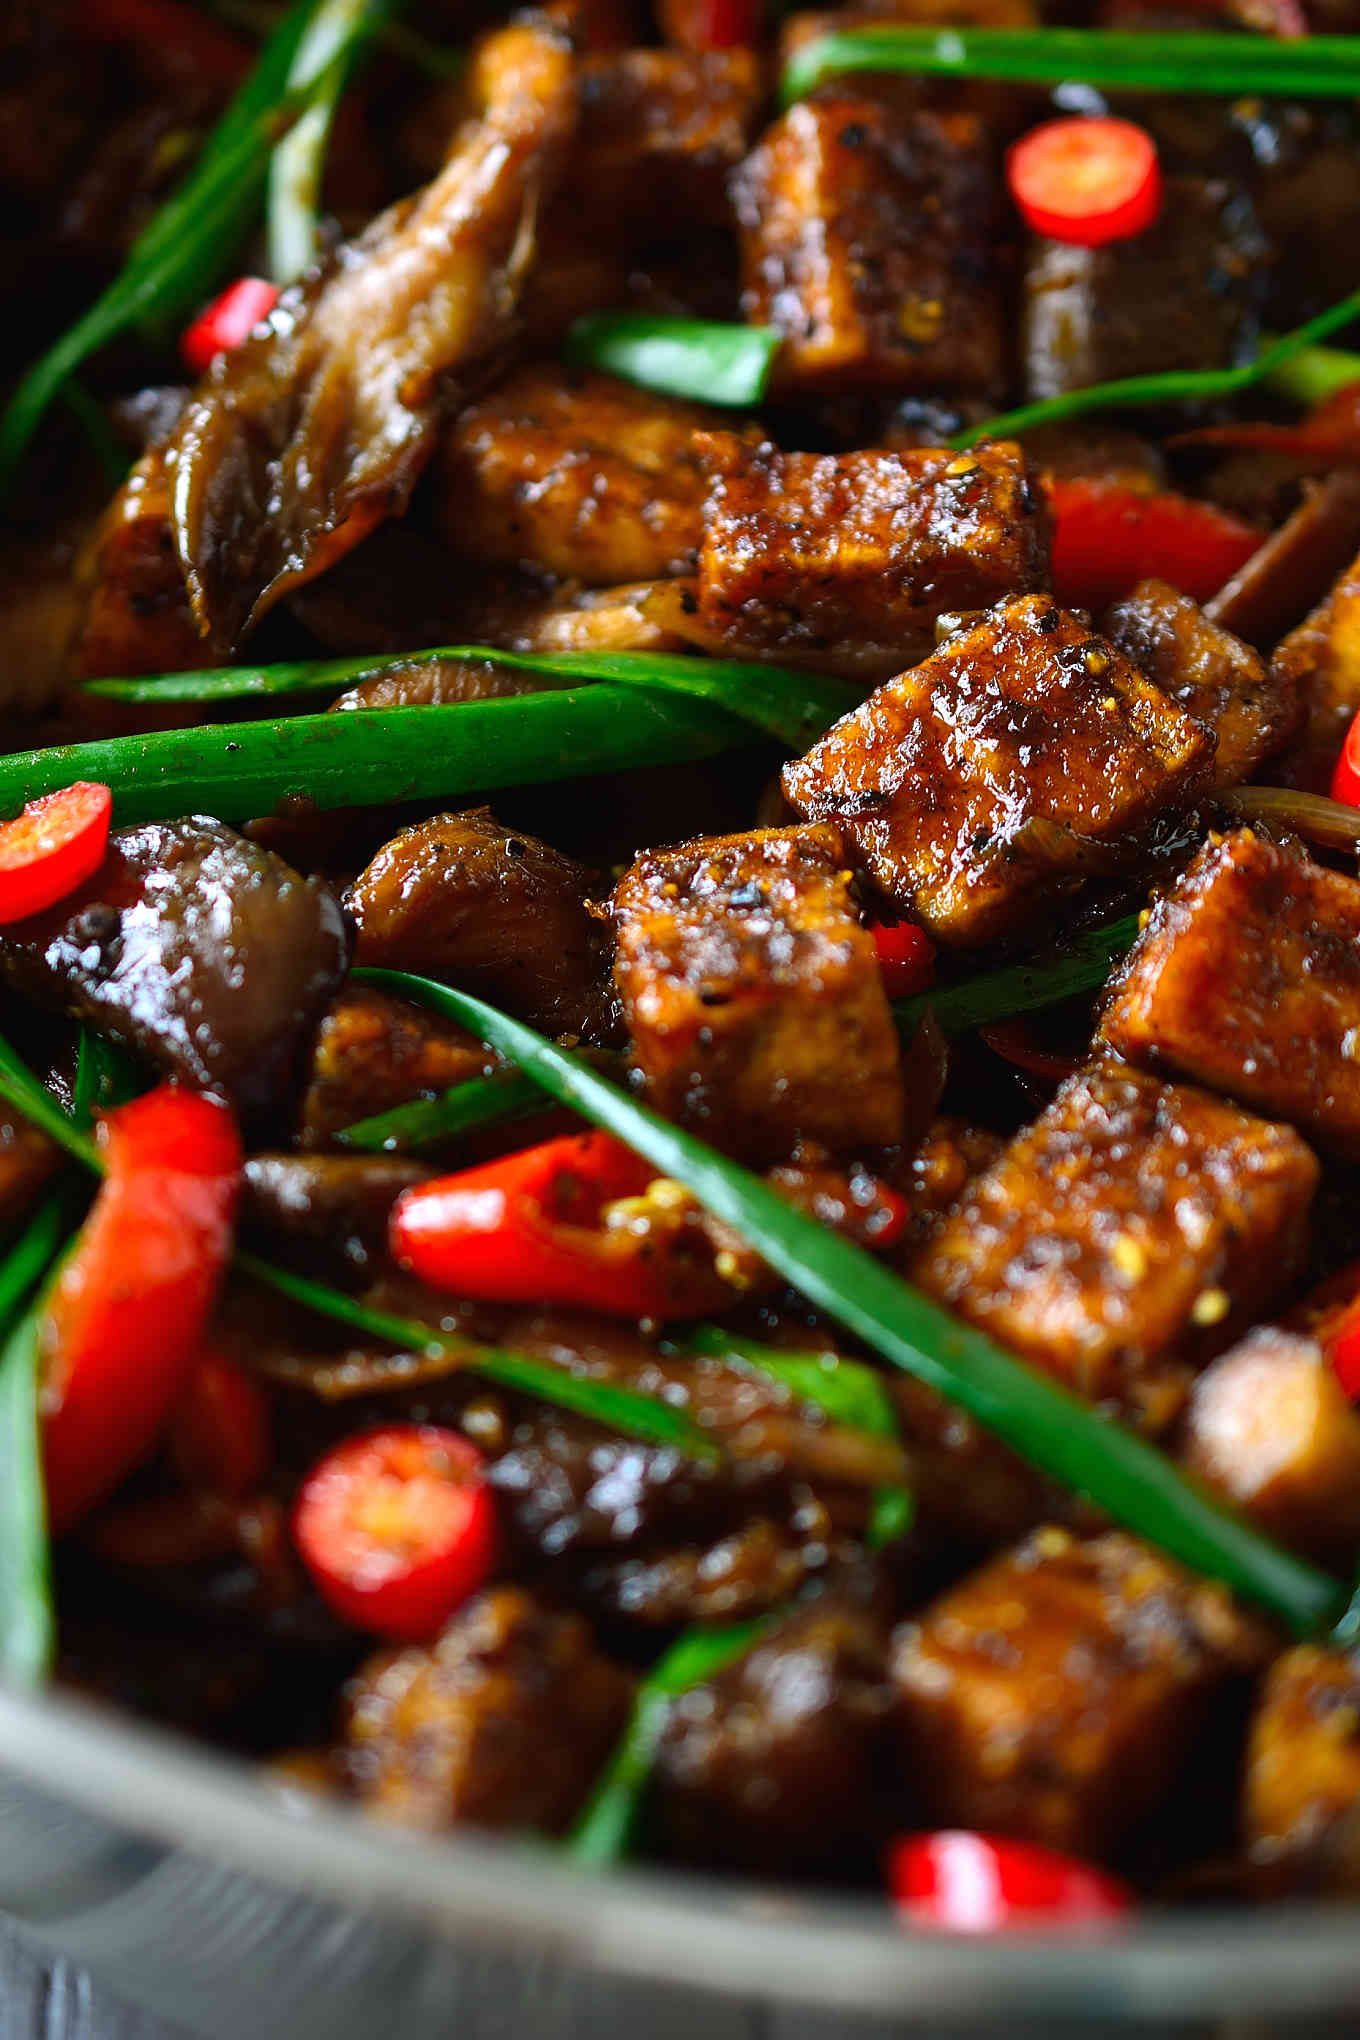 This vegan black pepper tofu recipe is everything you ever wanted tofu to be. It’s crispy on the outside, light and airy on the inside and smothered in a savory, sweet, fiery black pepper sauce that will have you licking your chopsticks. Tossed with meaty oyster mushrooms and creamy pan-fried eggplant served over rice, this easy tofu recipe is a complete meal on one plate.